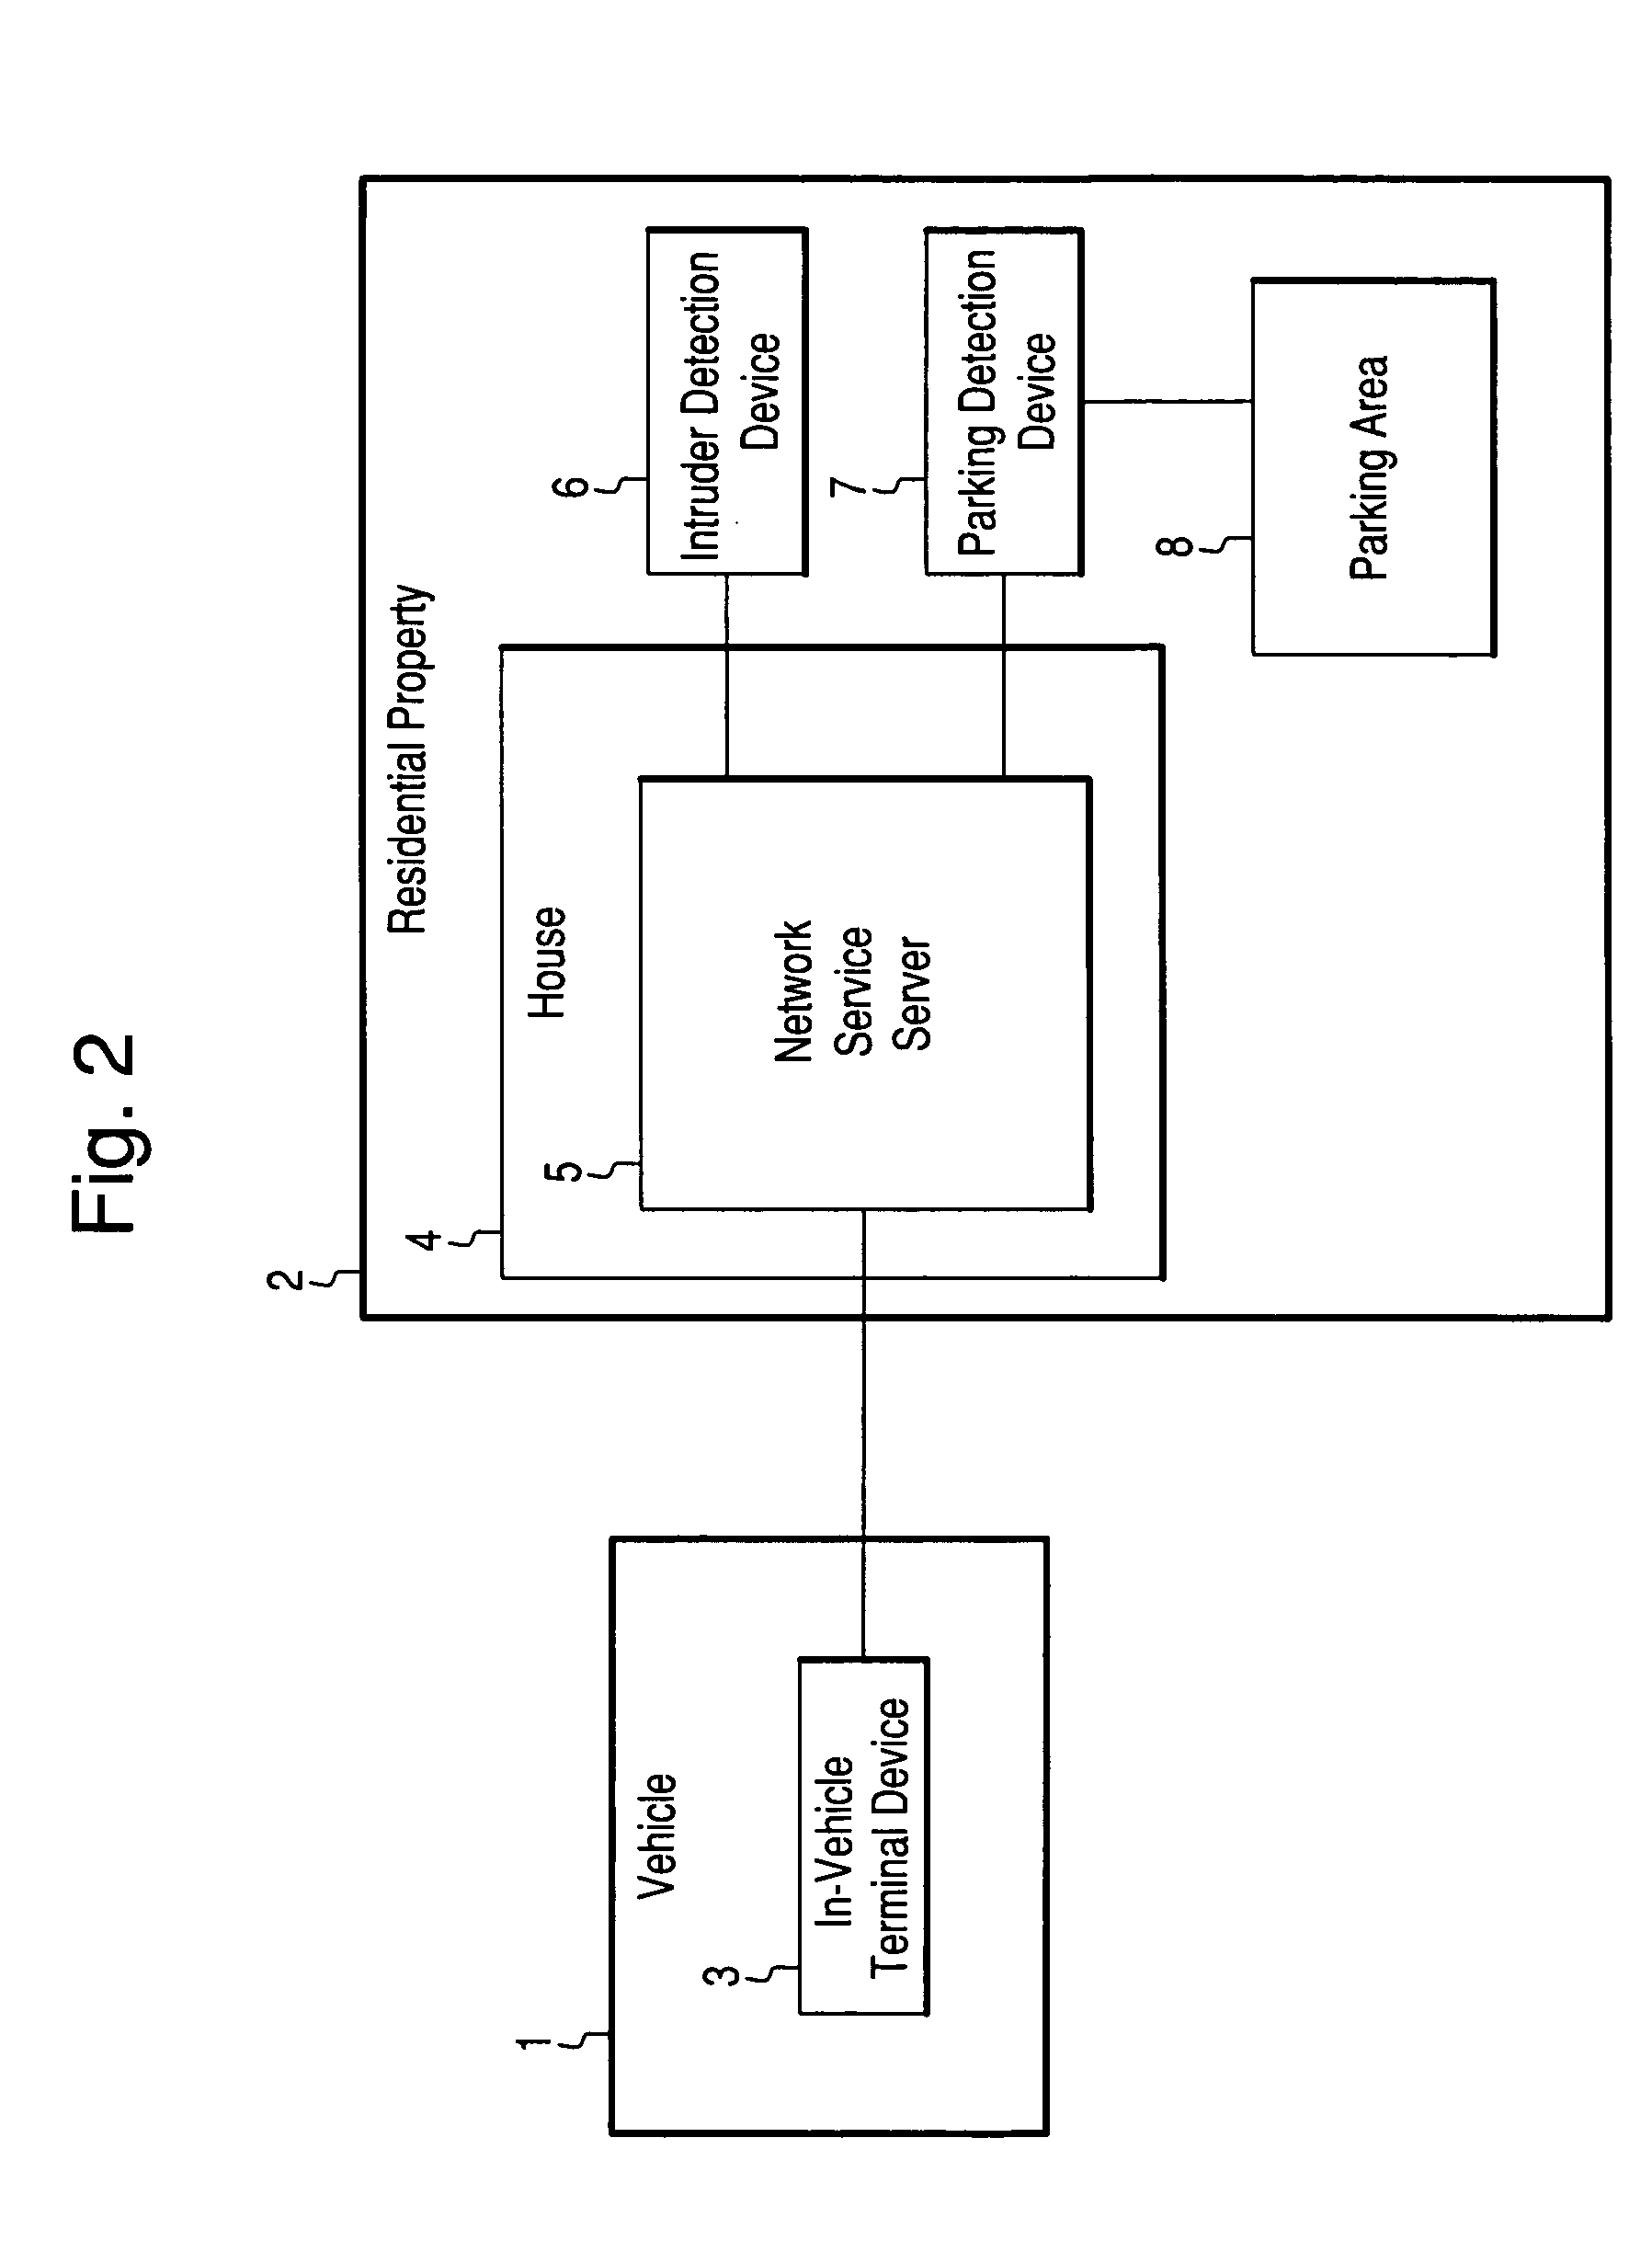 Security arrangement with in-vehicle mounted terminal